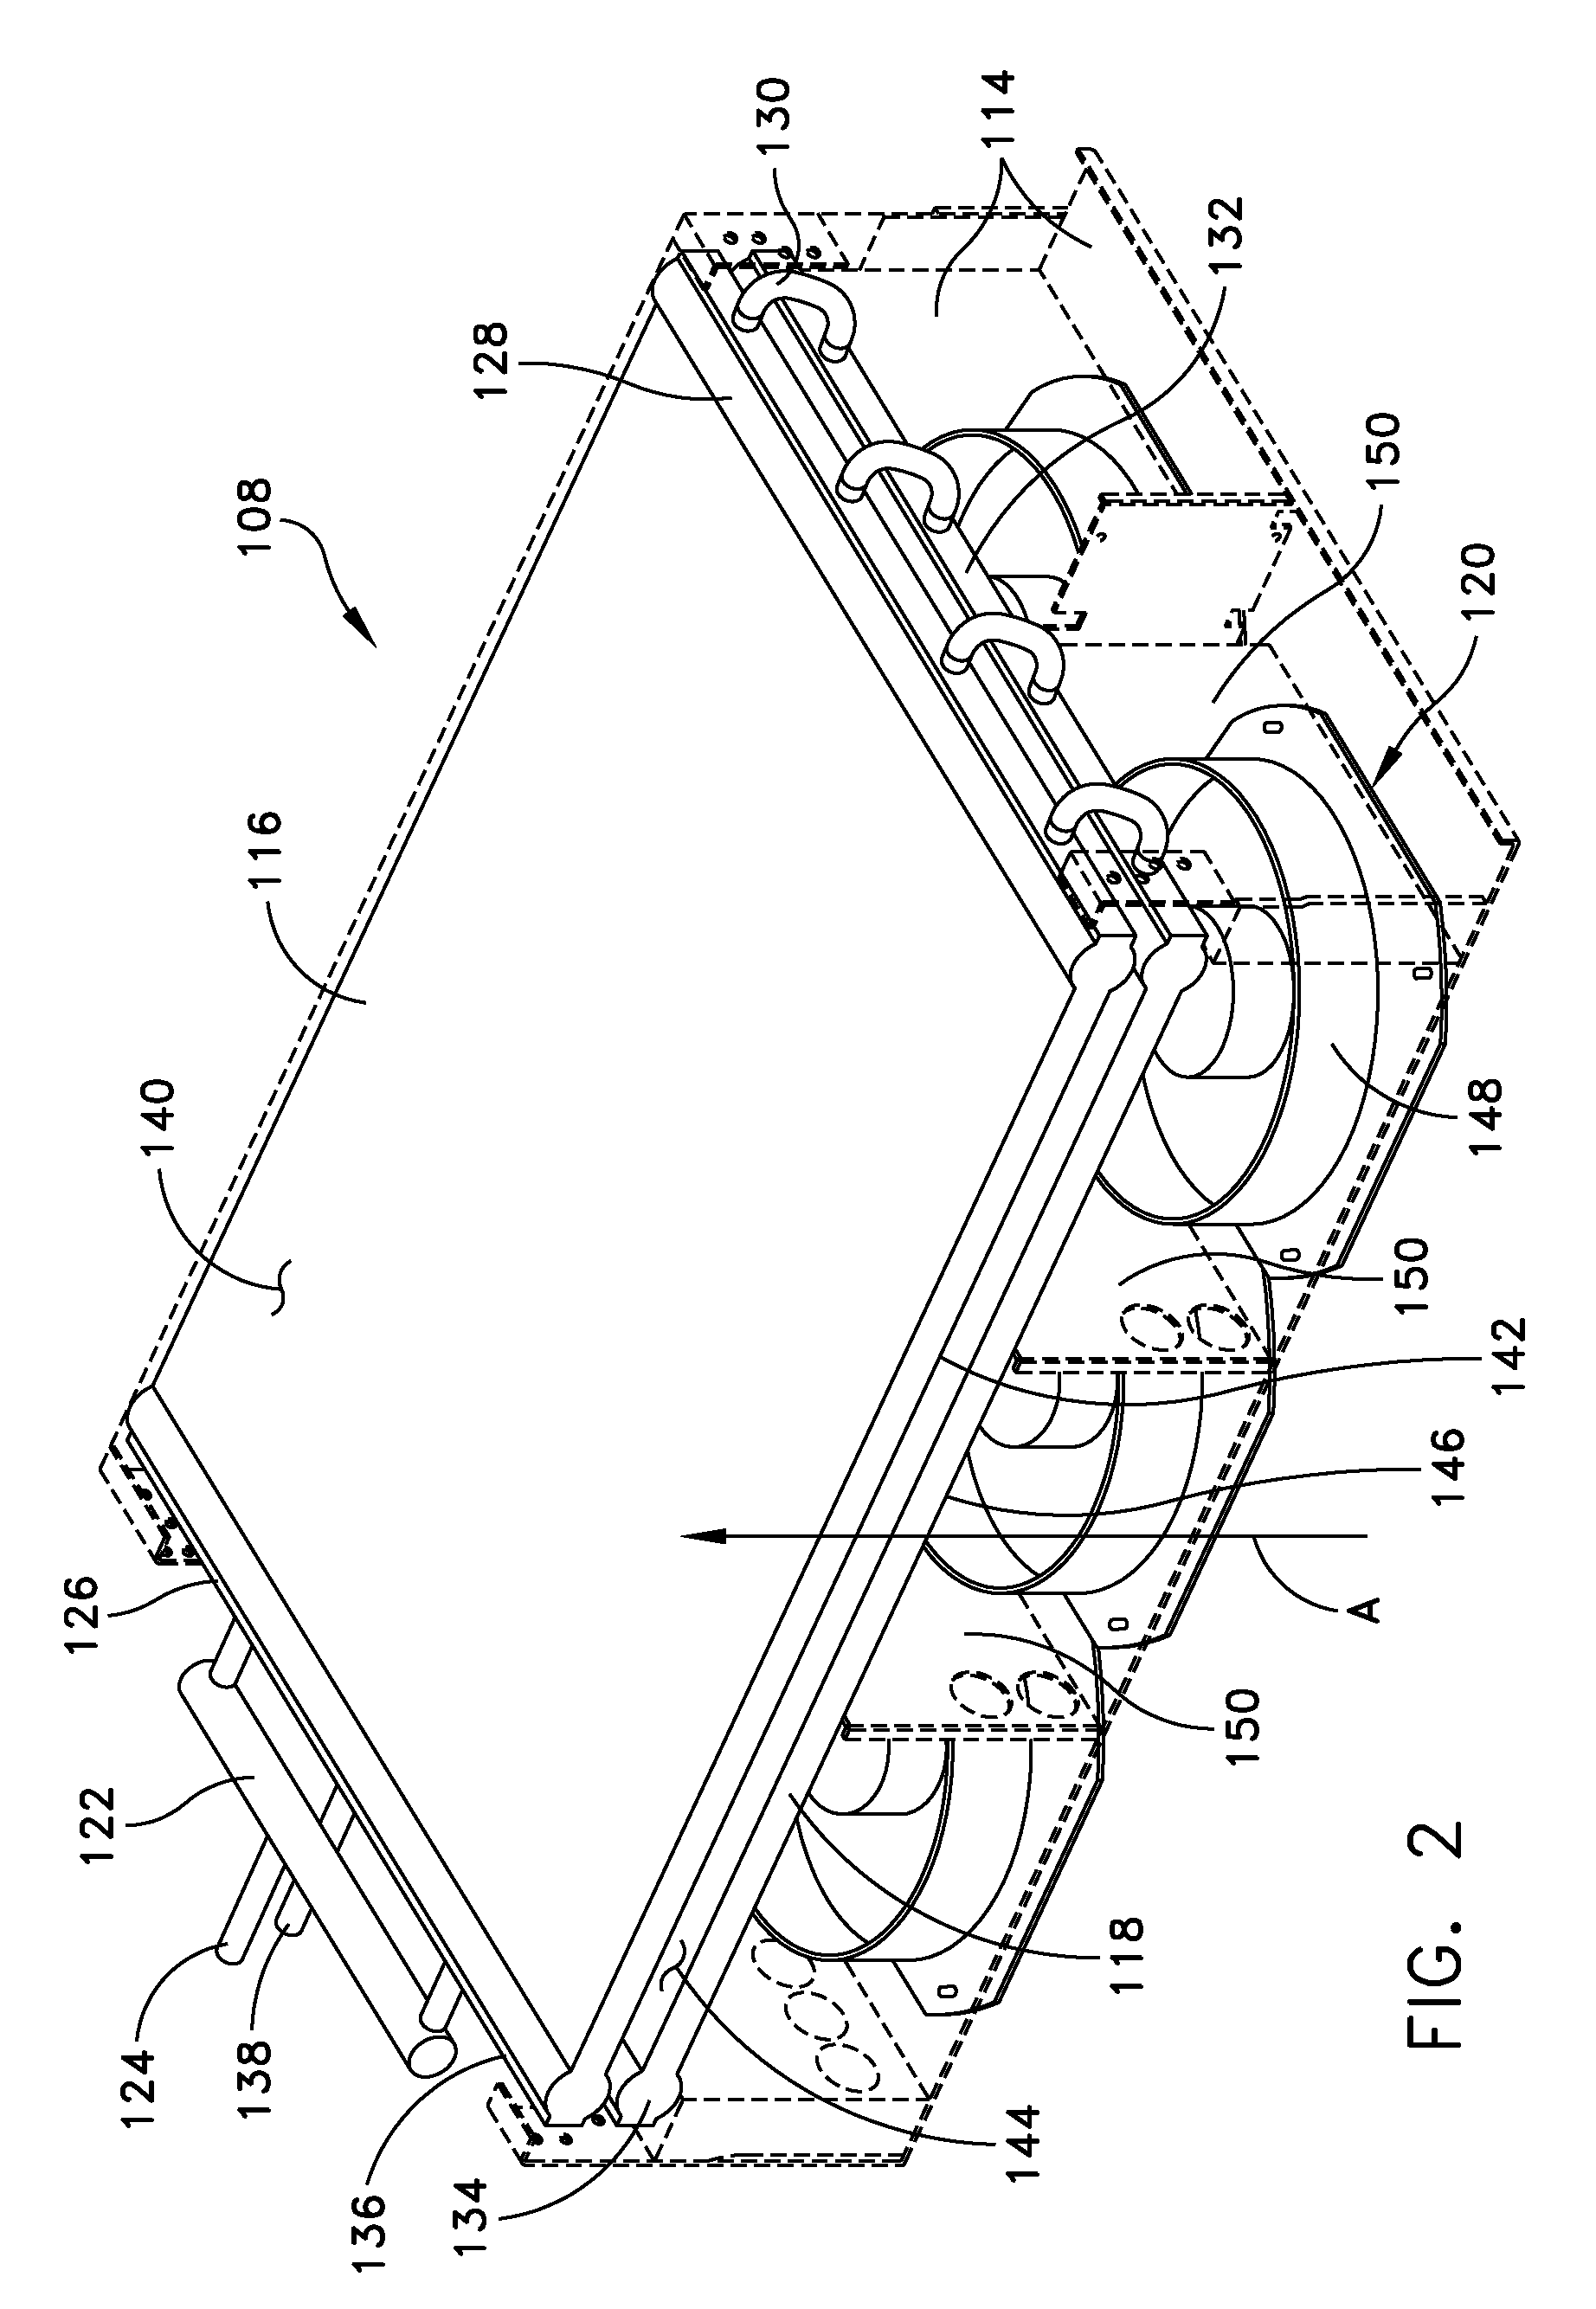 Hot aisle containment cooling unit and method for cooling